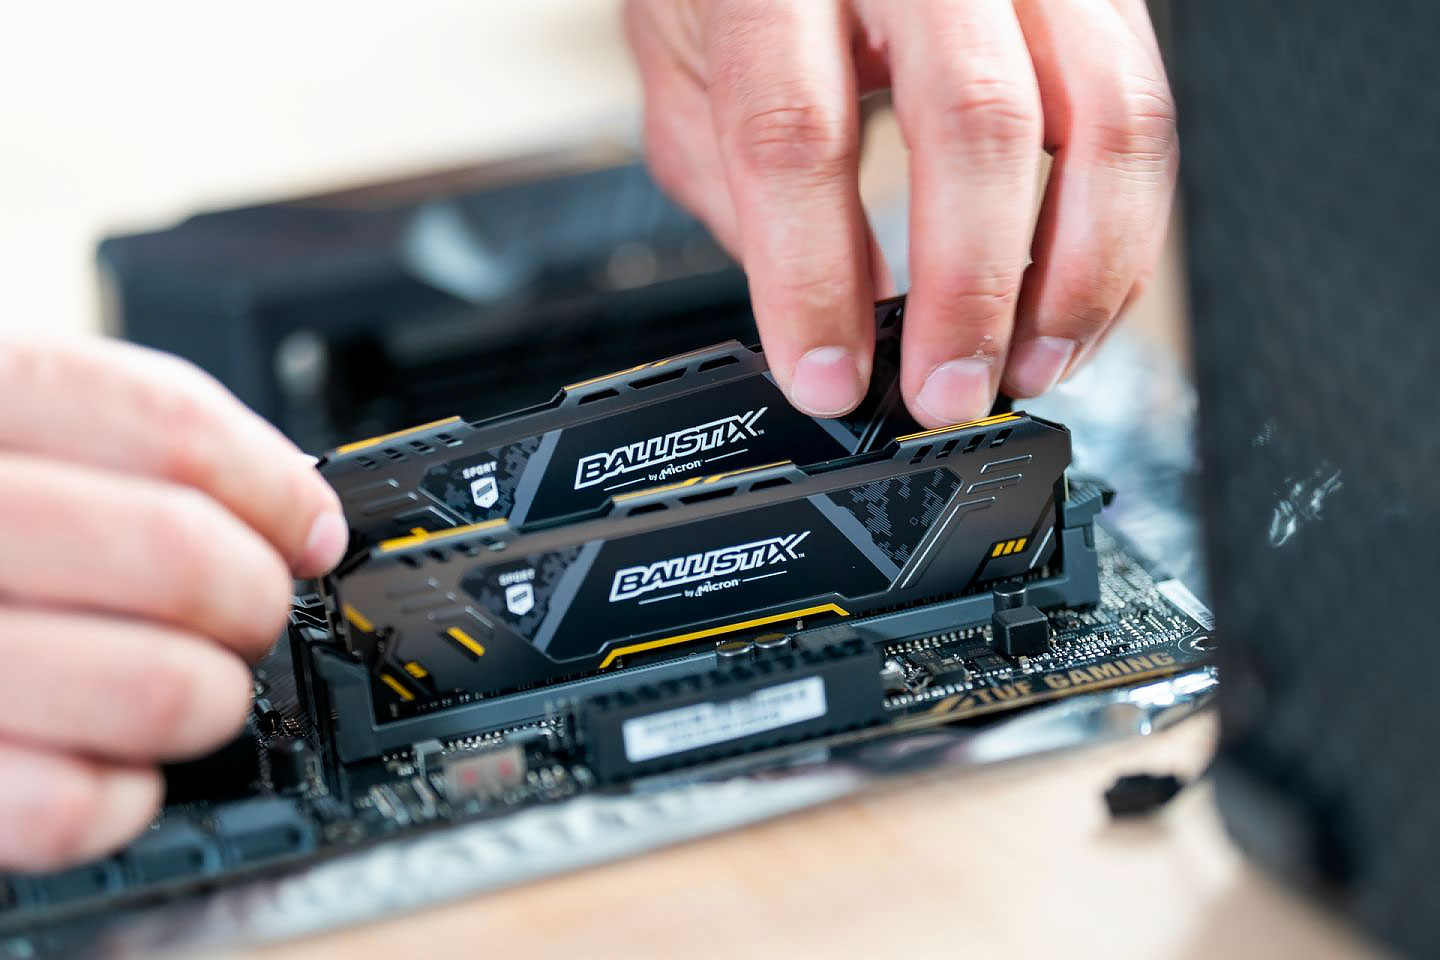 Ballistix memory being placed in a motherboard